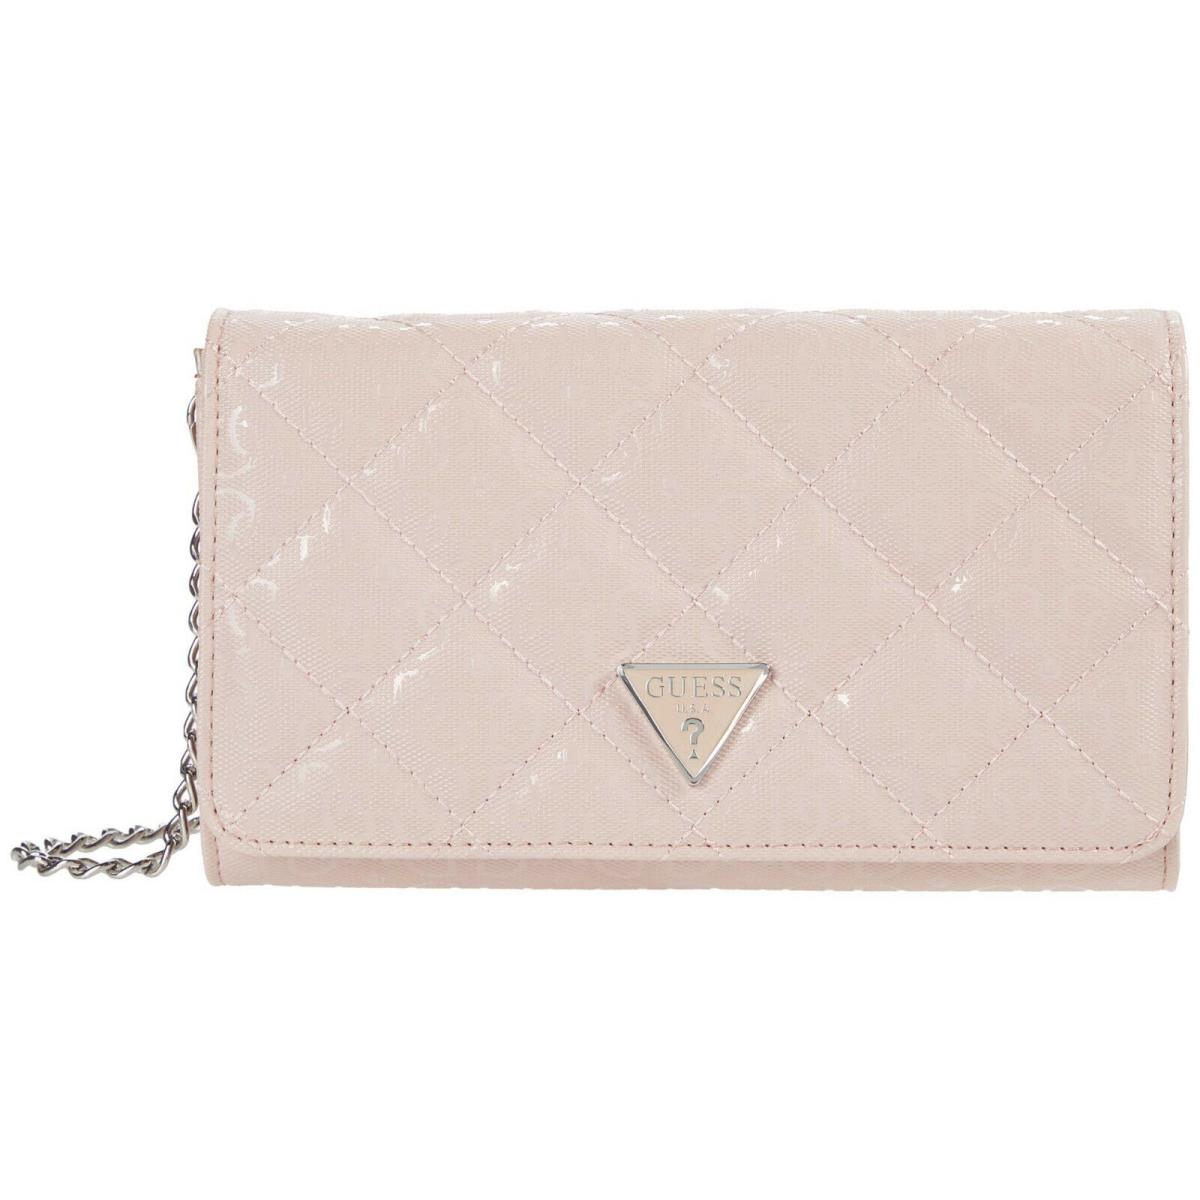 Guess Women`s Blush Pink Glossy Patent Quilted Chain Wallet Crossbody Purse